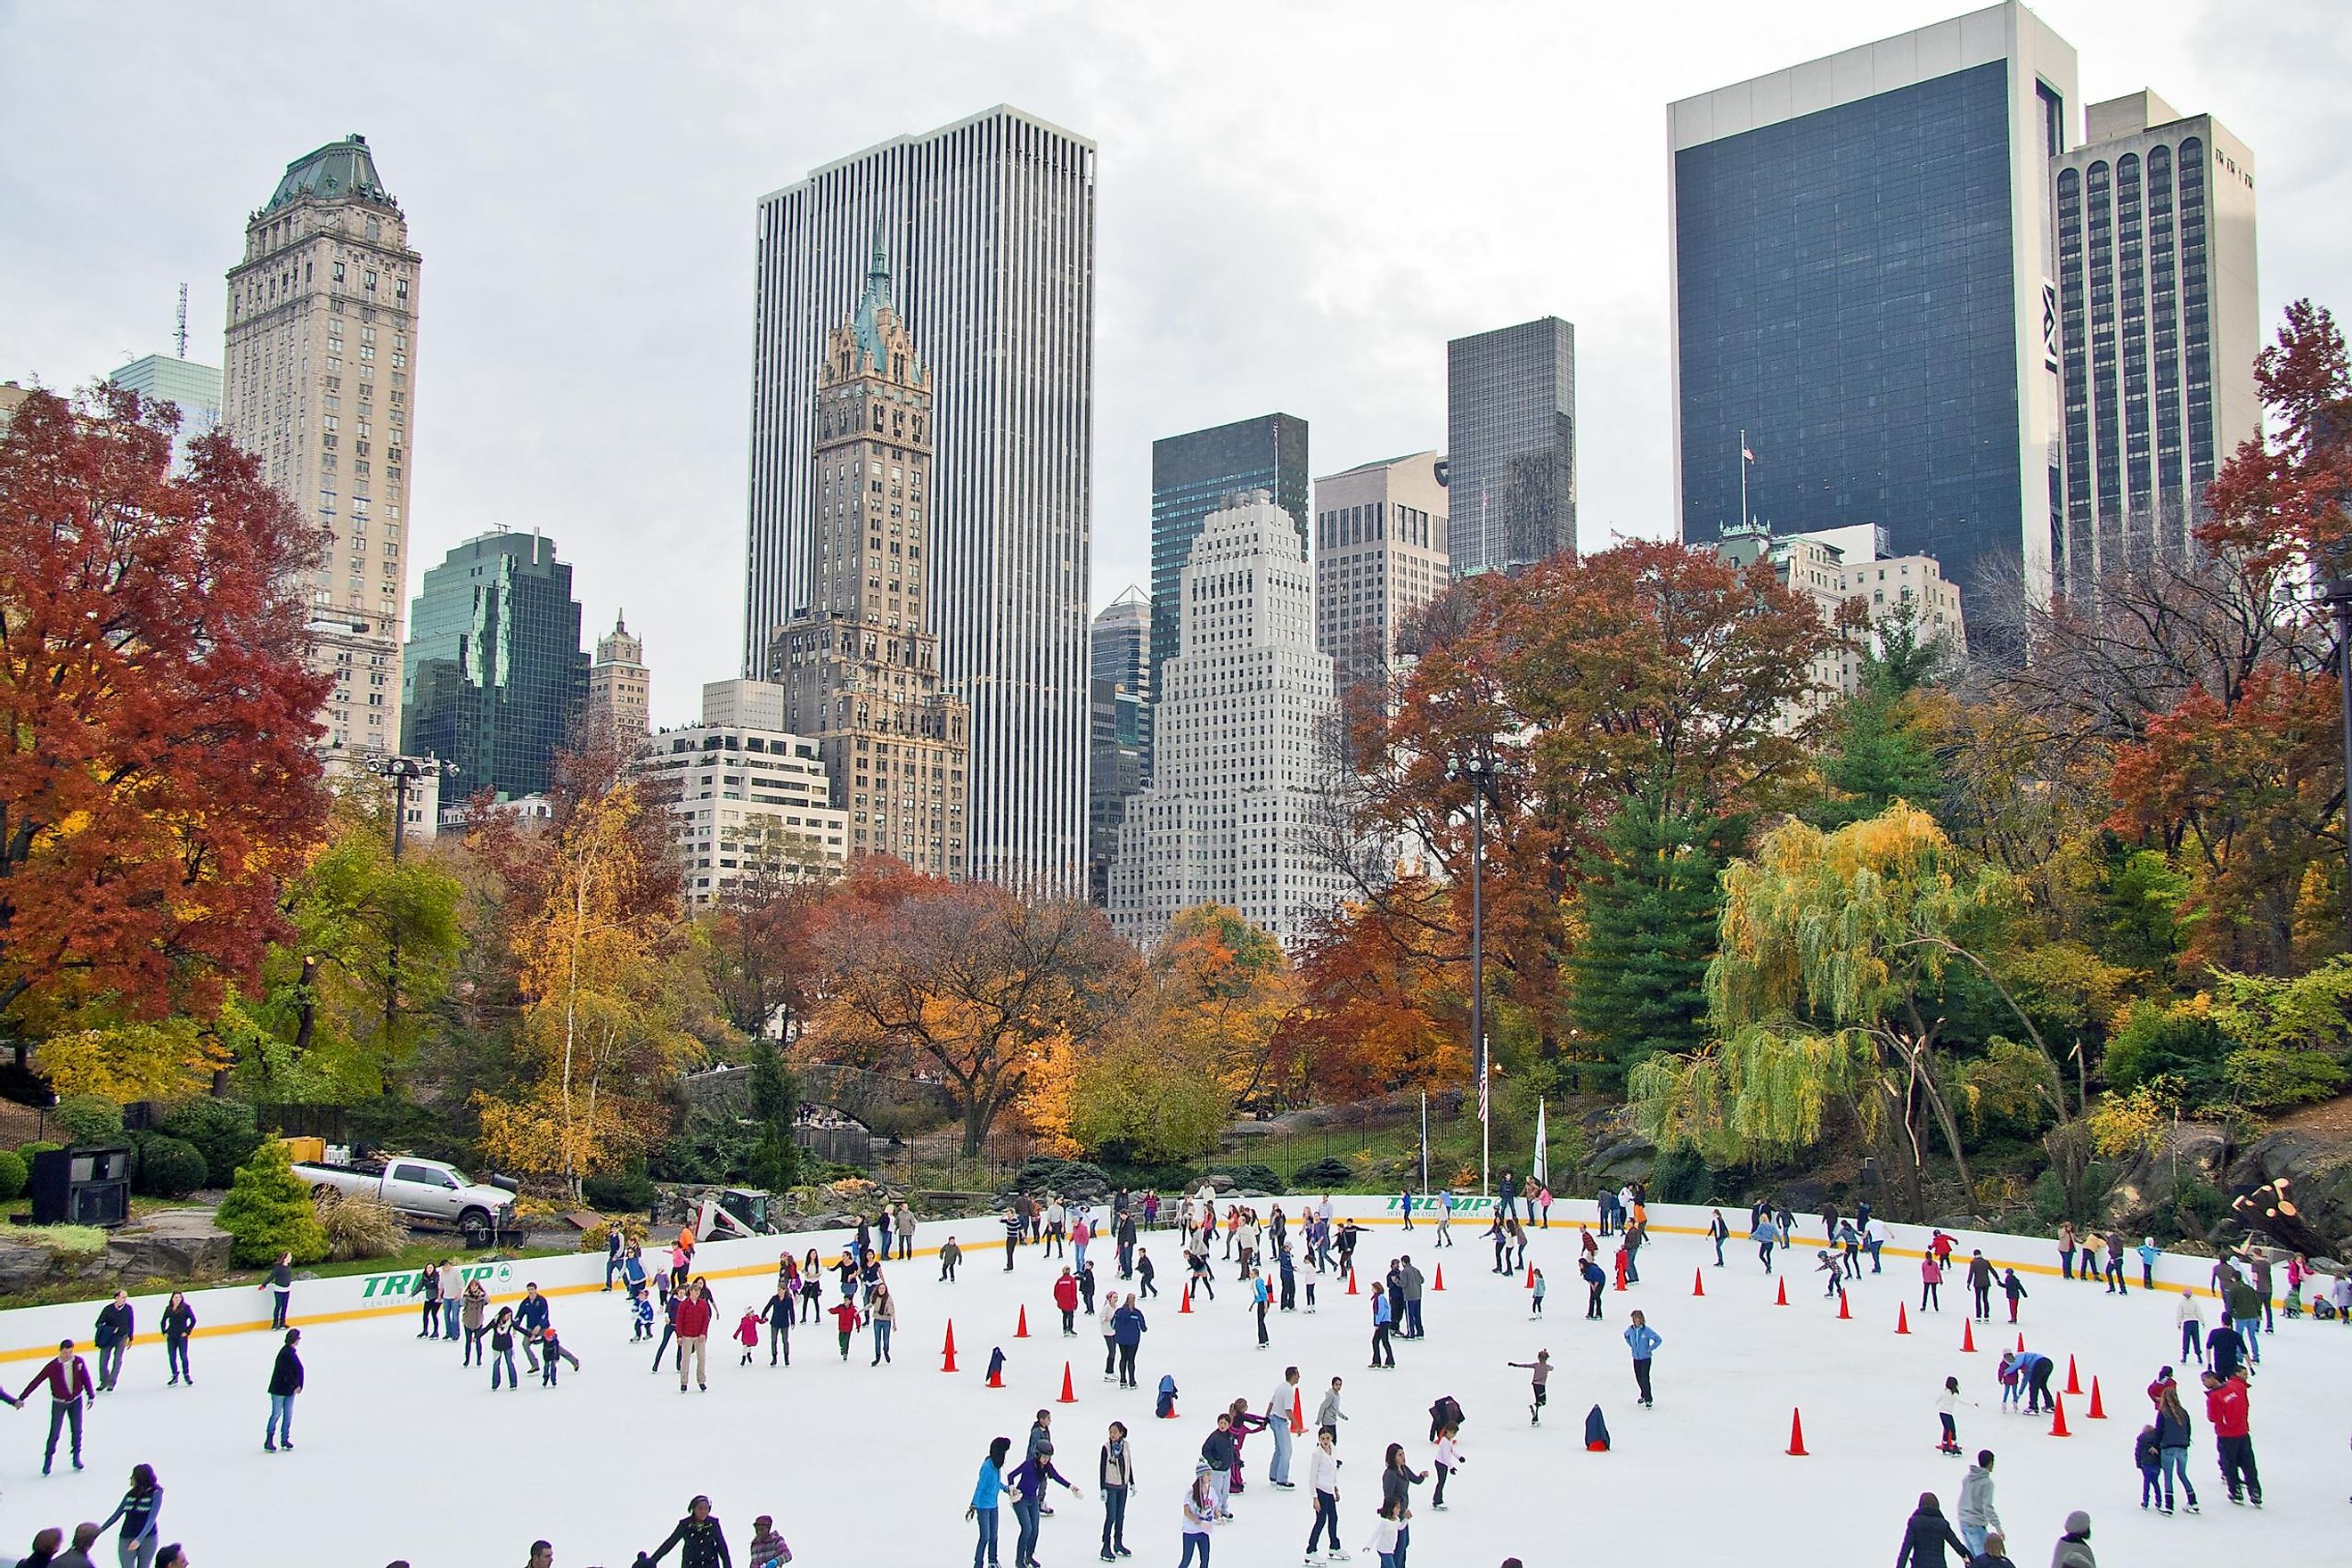 New York City ice rink. Editorial credit: Kris Yeager / Shutterstock.com